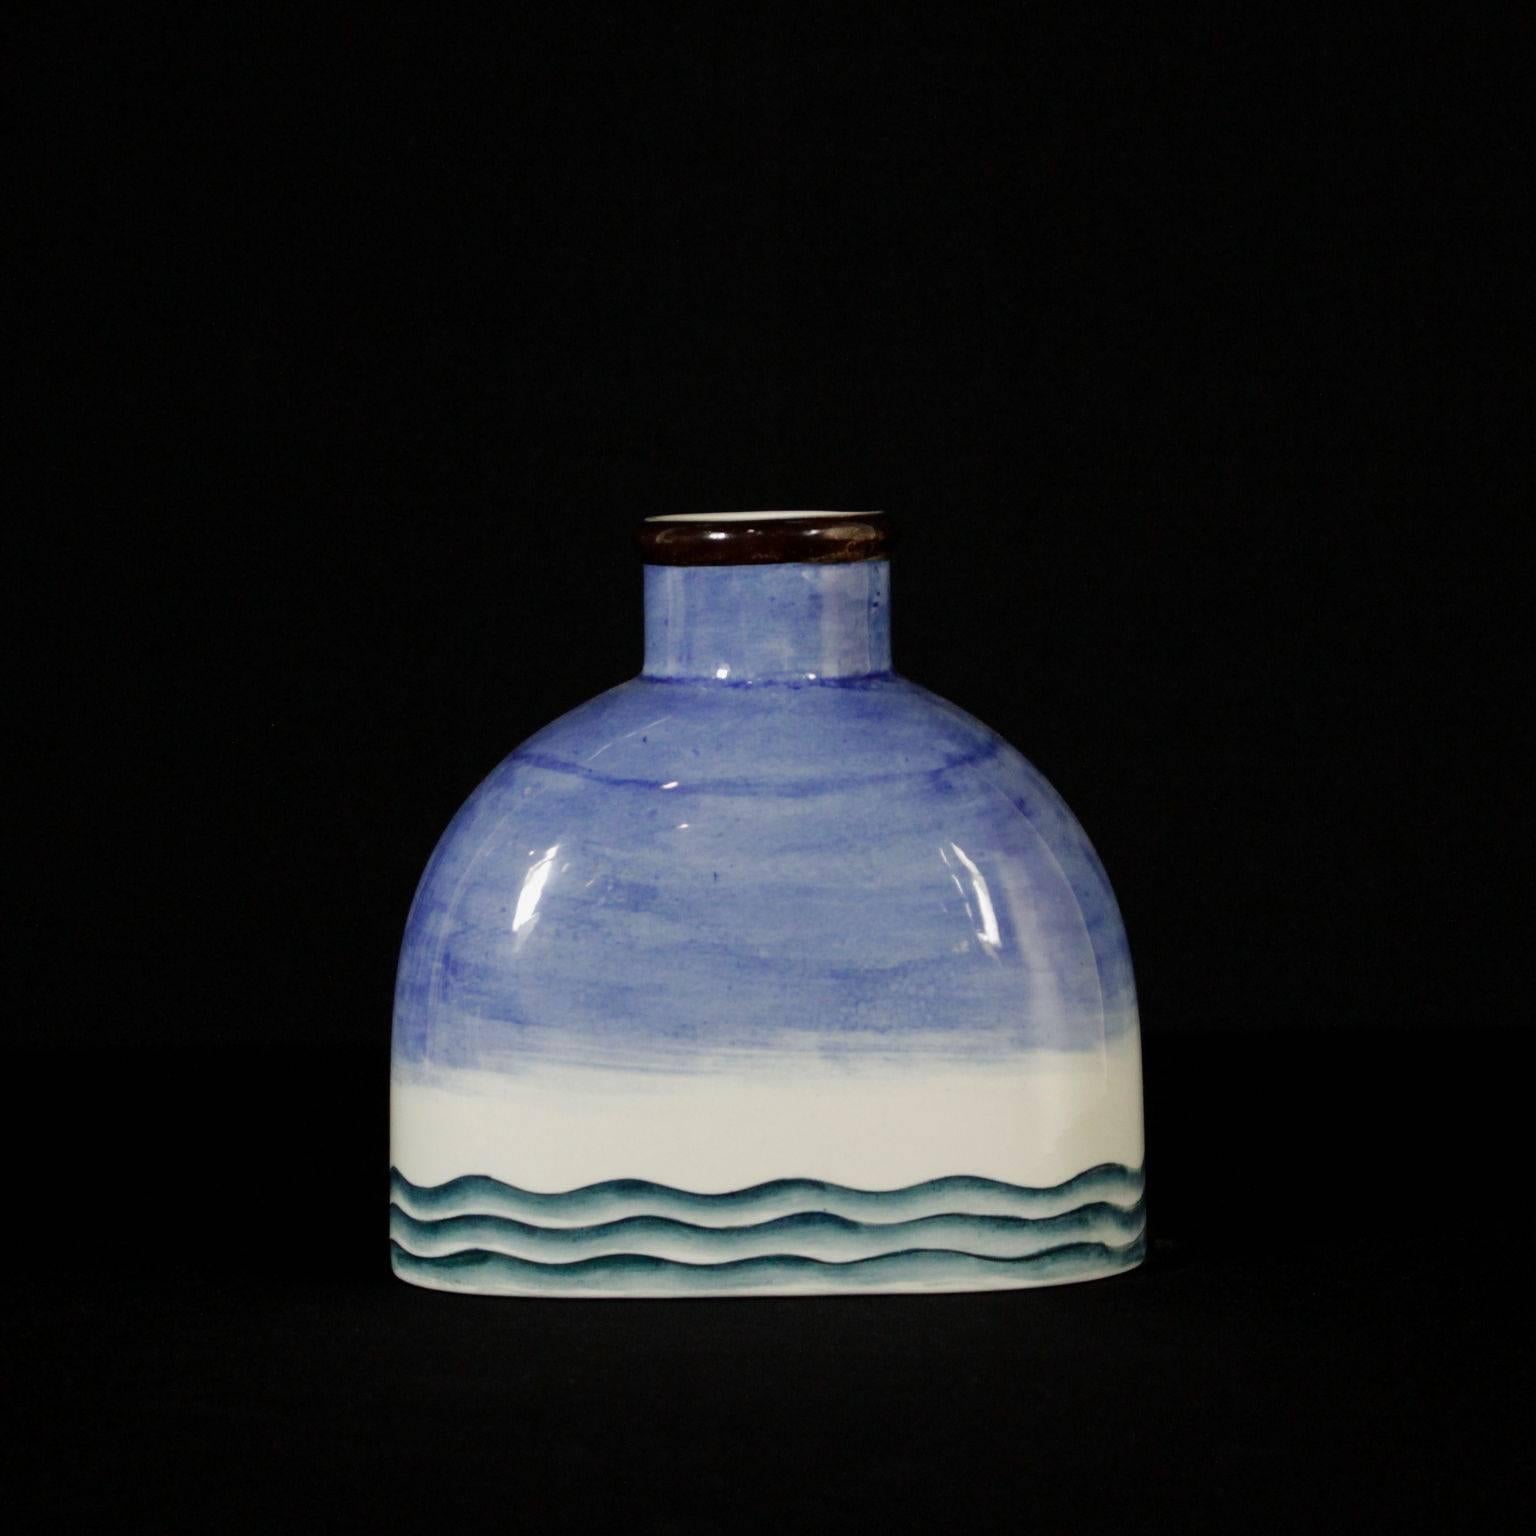 A bottle shaped ceramic vase with sailing ship decorations. Designed by Gio Ponti, manufactured by Richard Ginori-San Cristoforo Milano, as in the brand beneath the base. Firenze, Italy, 1930s.